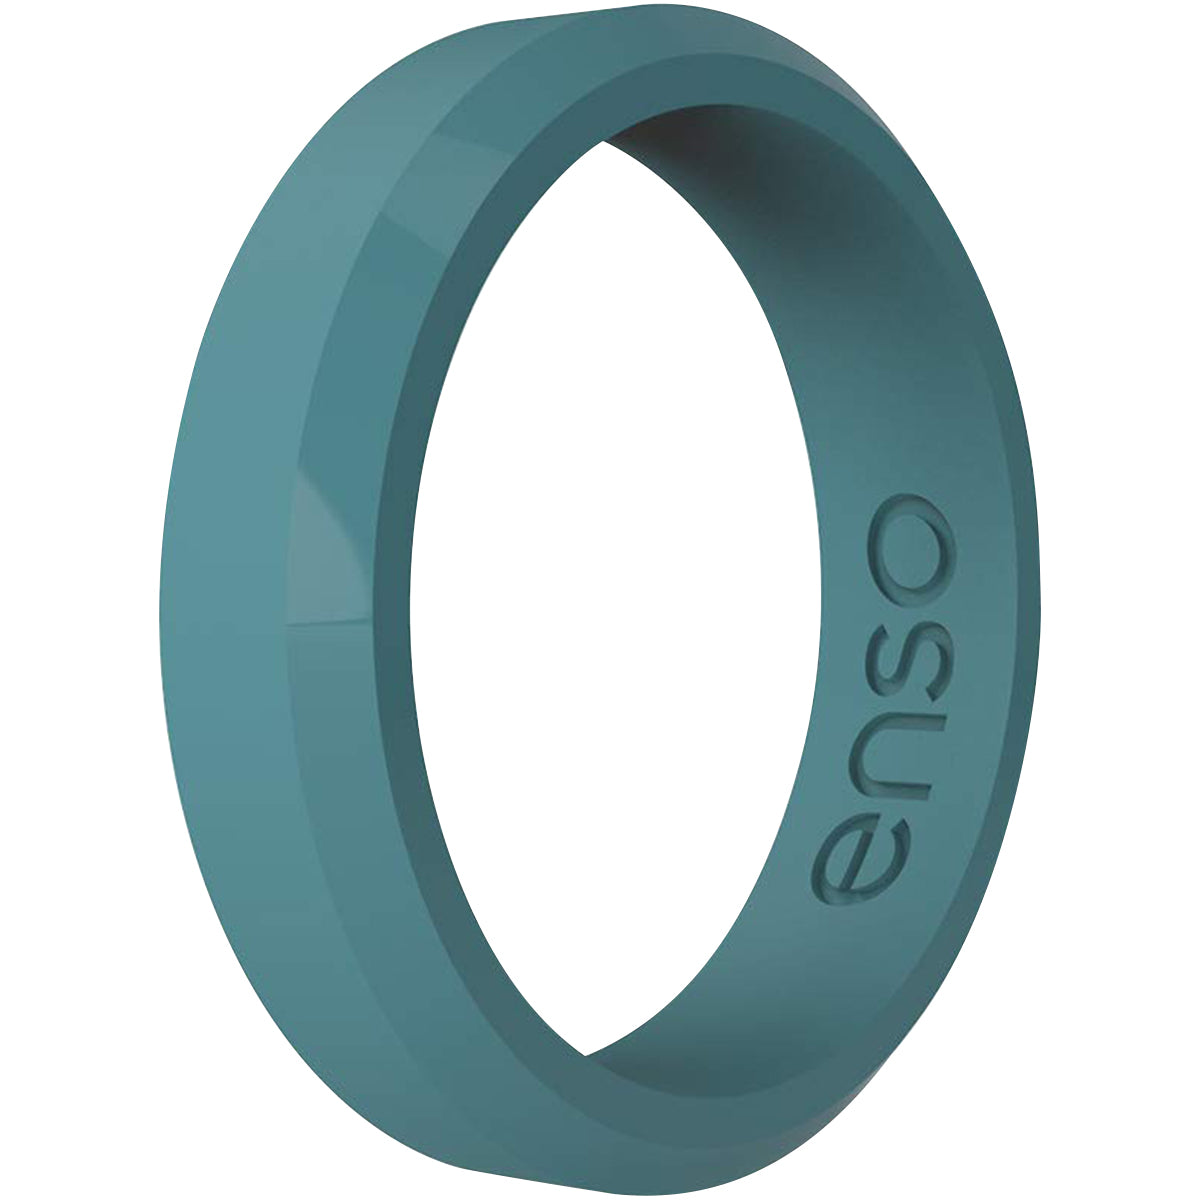 Enso Rings Thin Bevel Series Silicone Ring - Teal Enso Rings